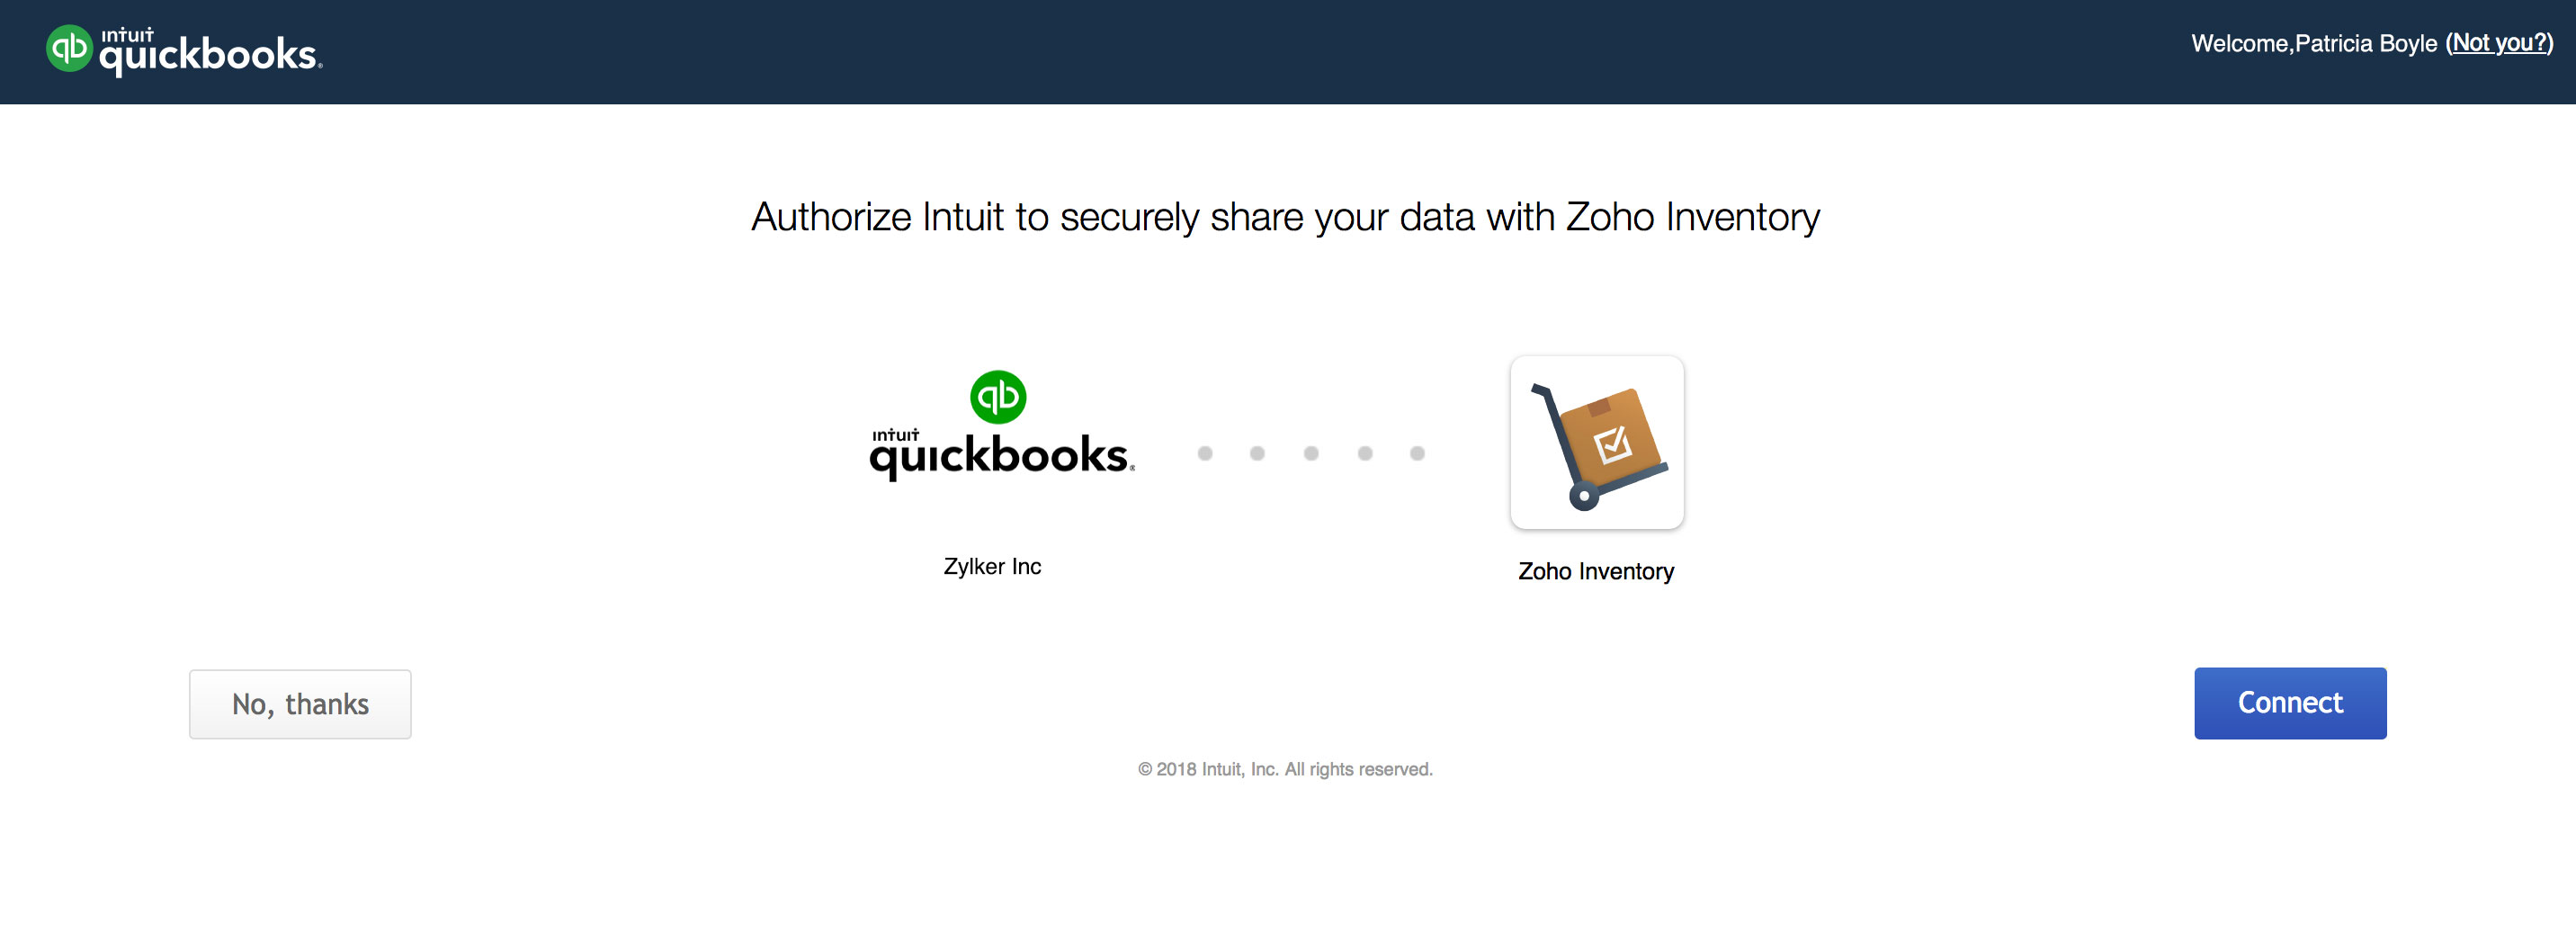 QuickBooks integration with Zoho Inventory